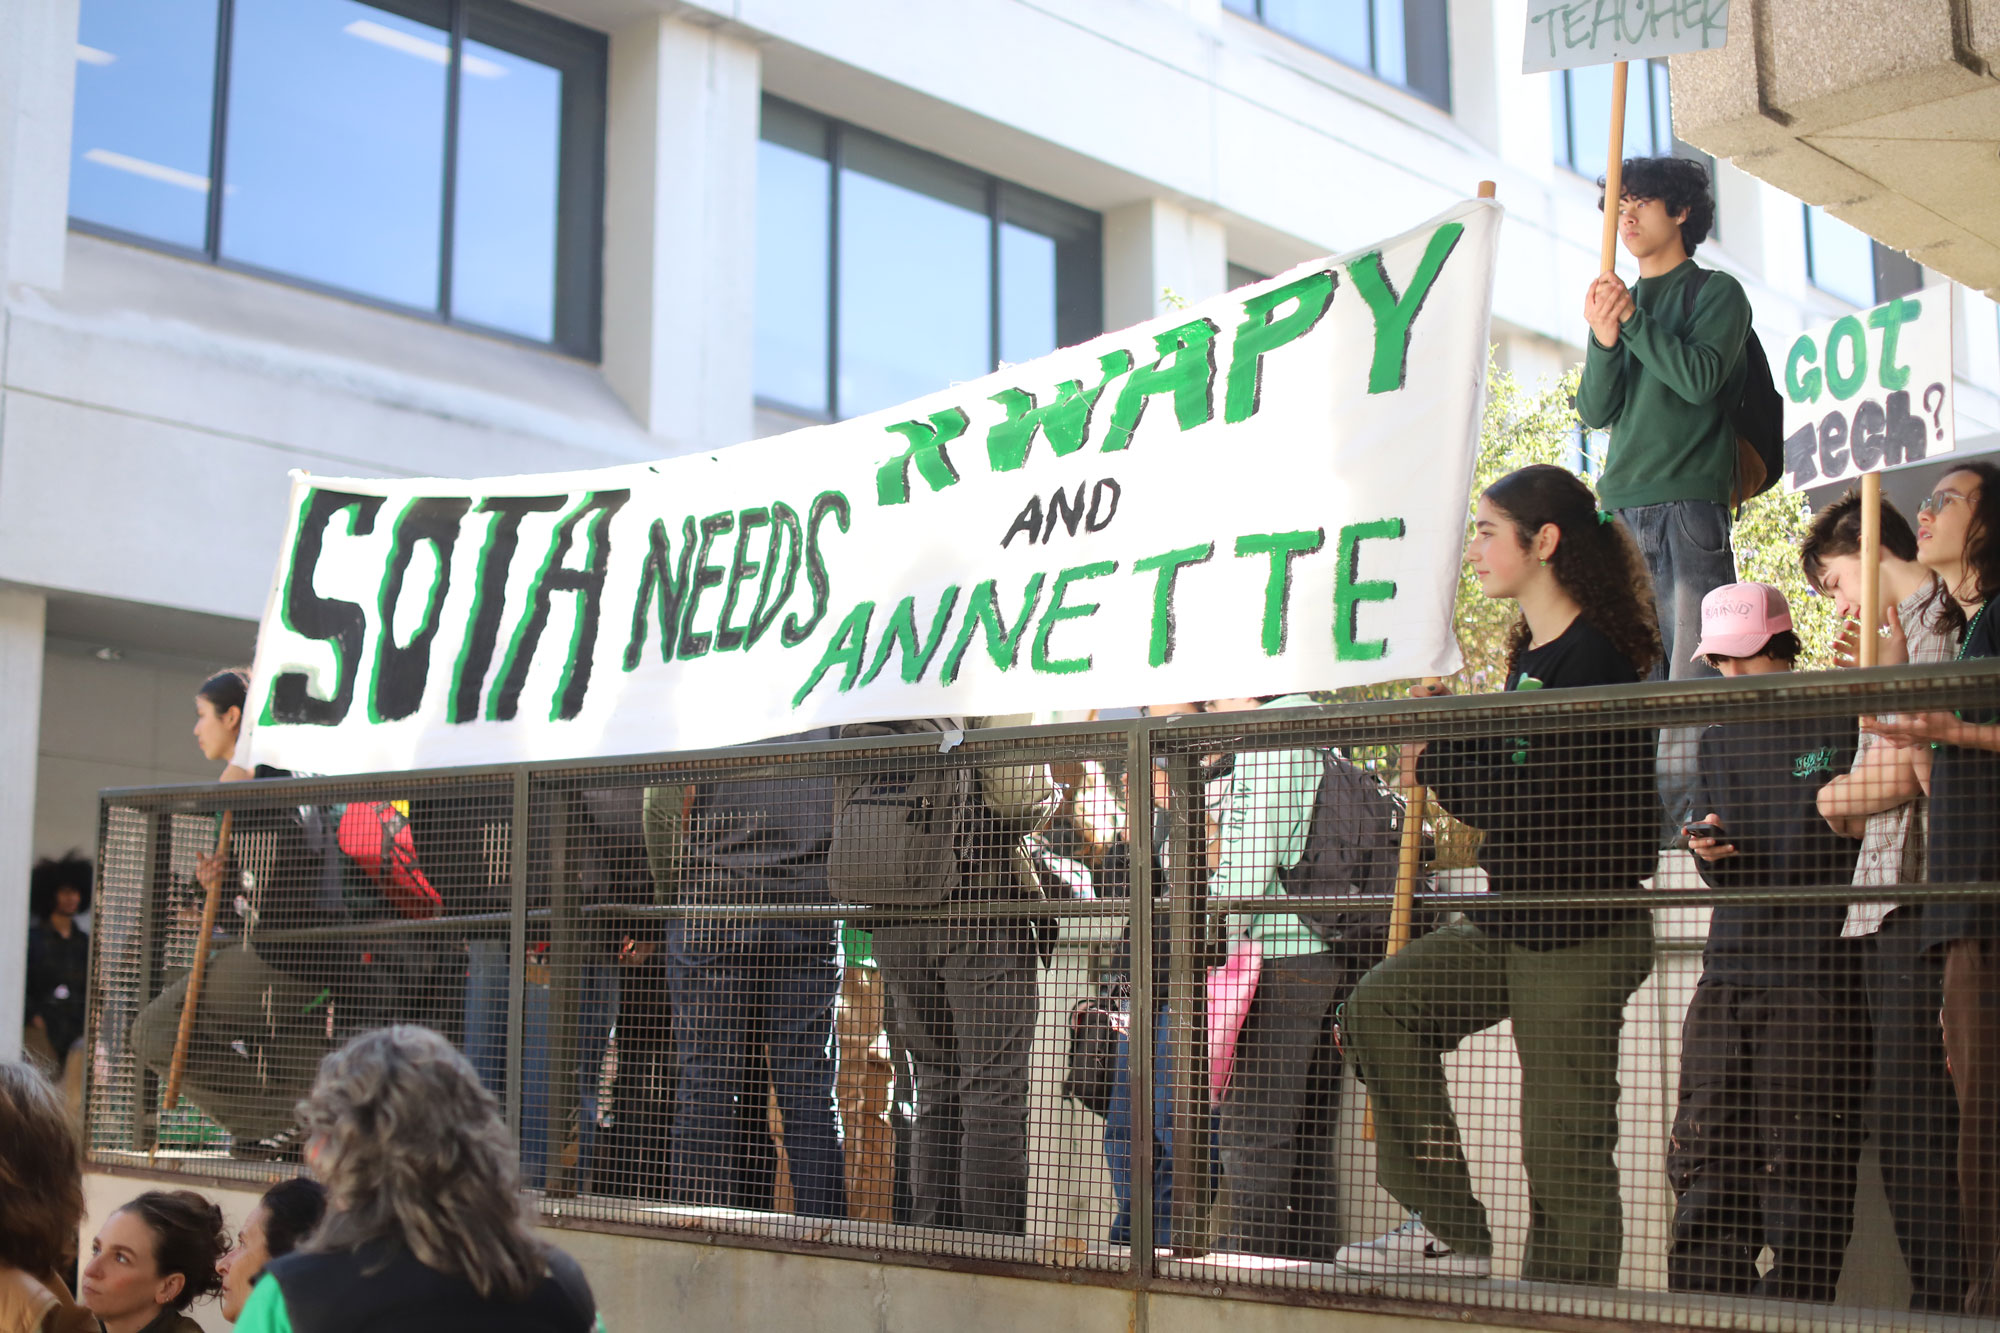 Young people hold a large painted banner reading "SOTA needs Kwapy and Annette"